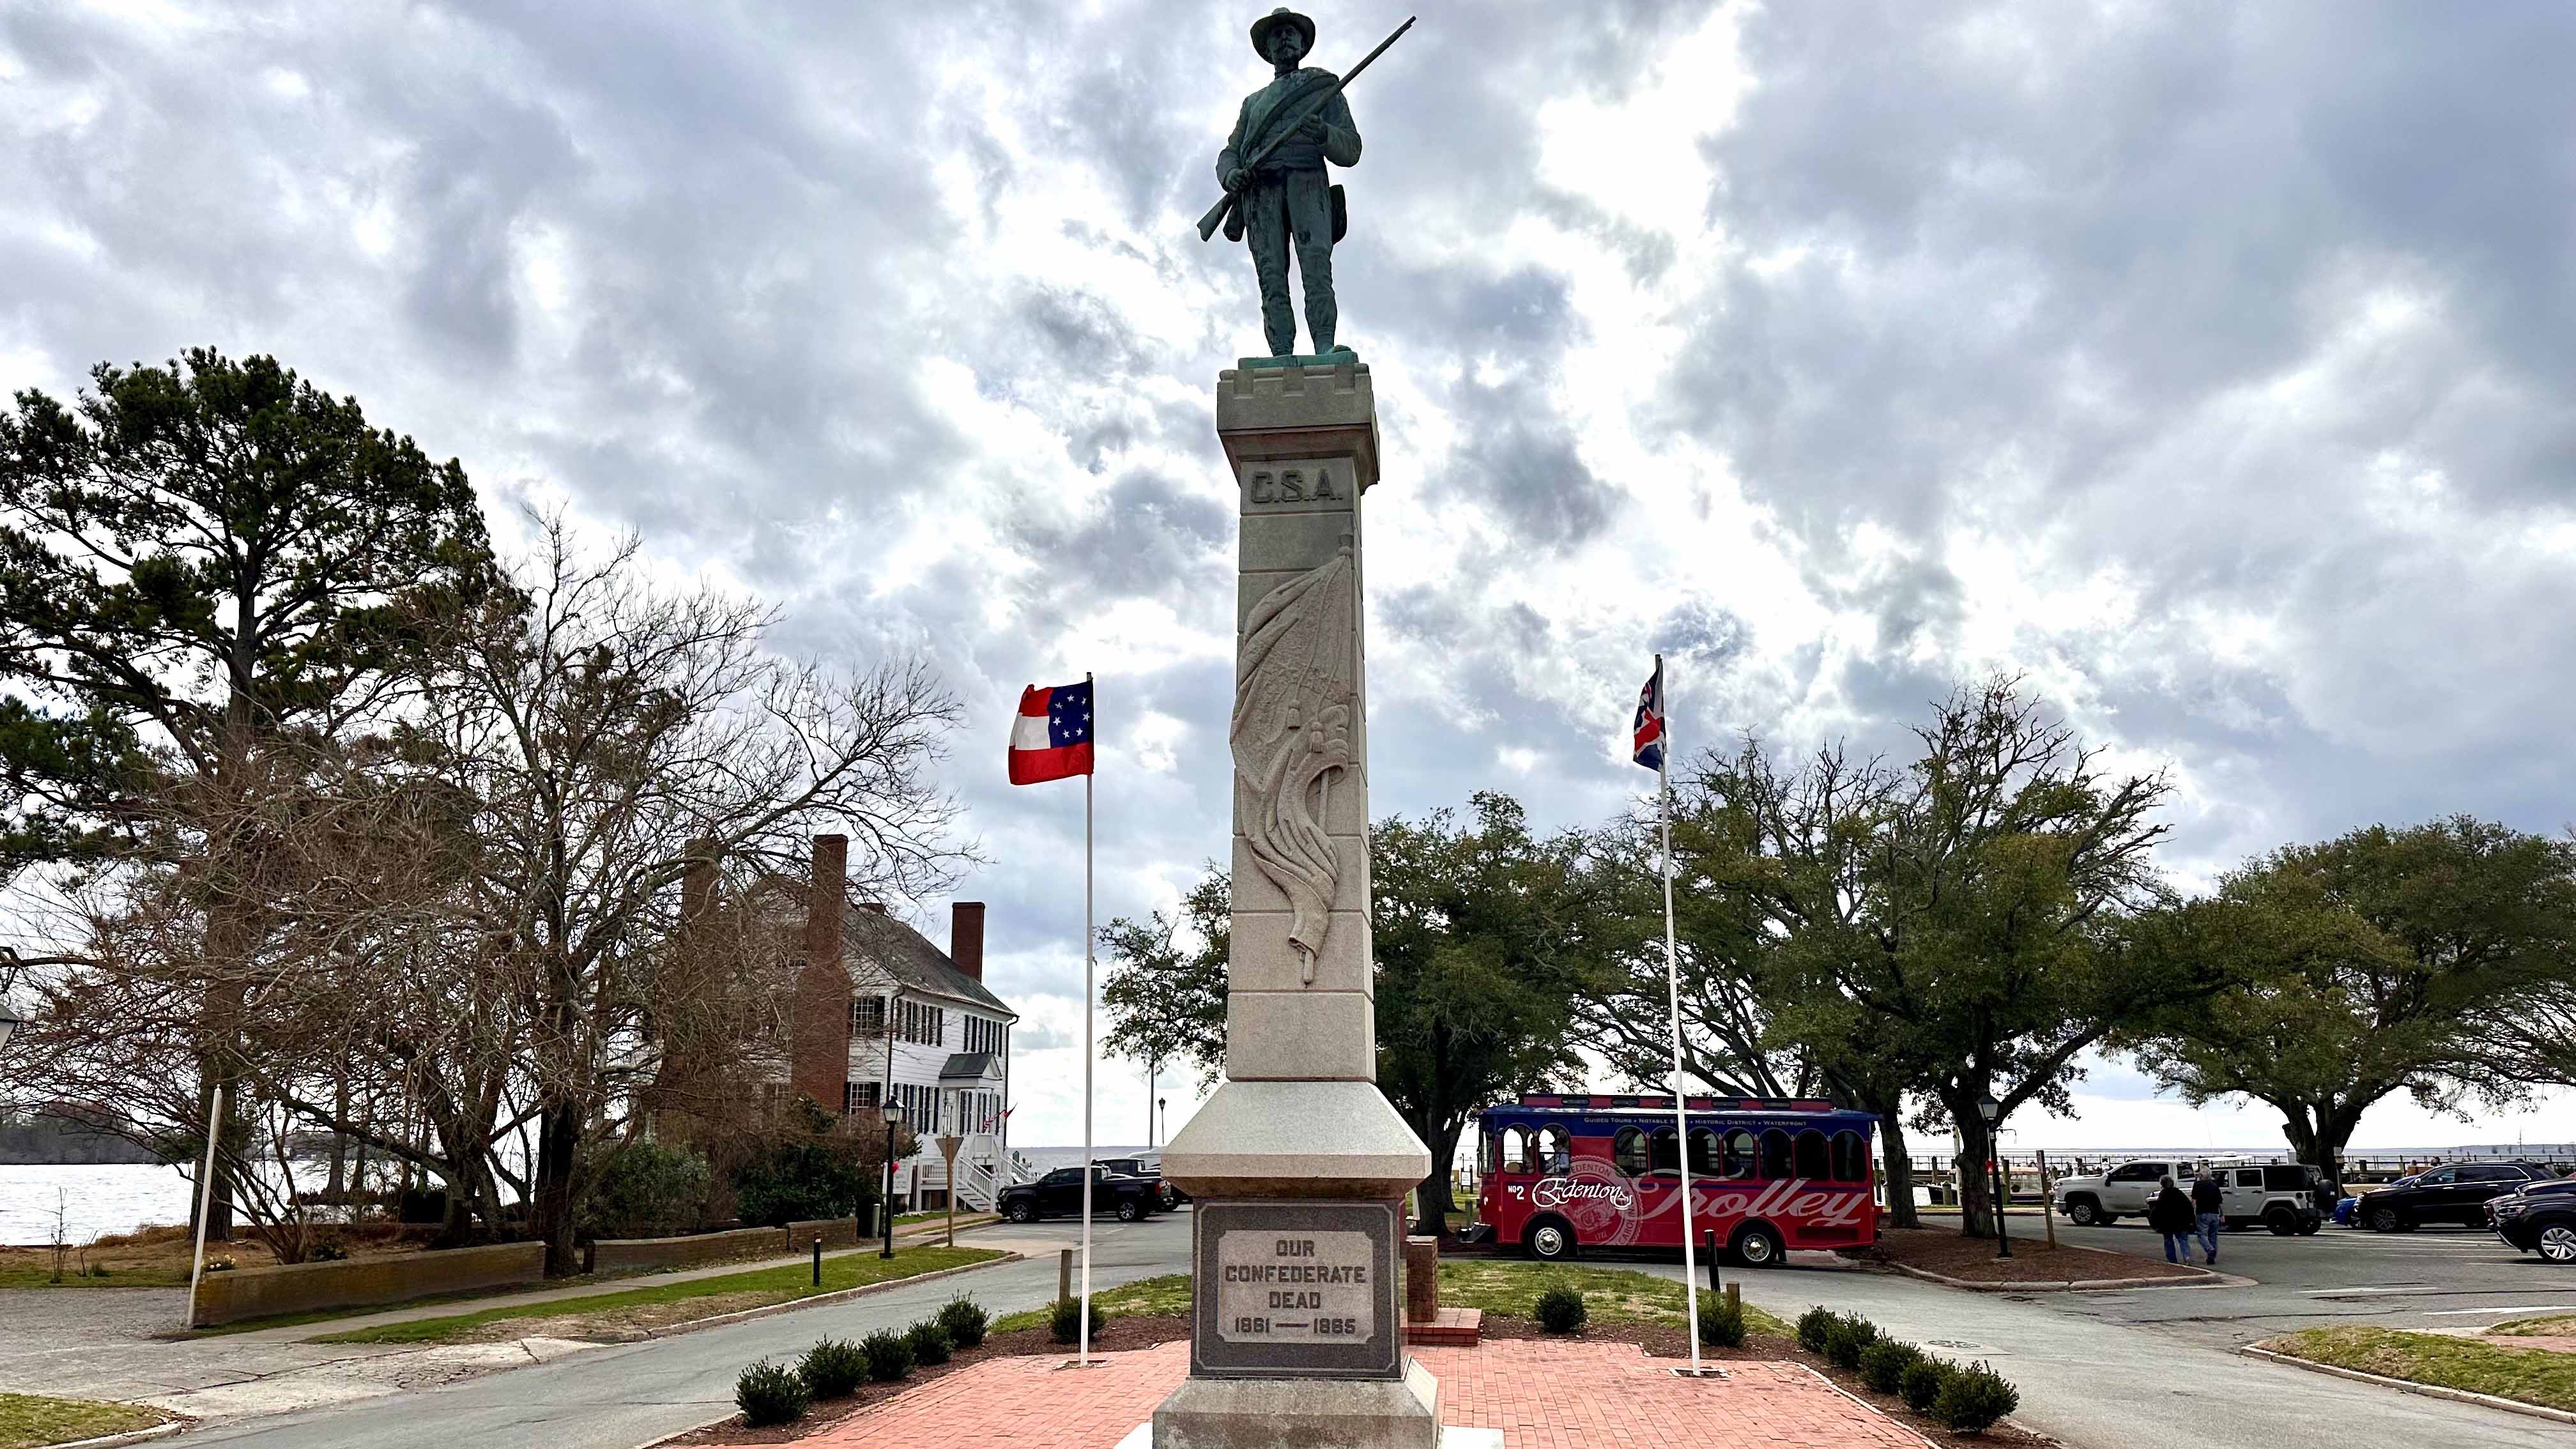 Almost a year after voting for its removal, Edenton’s Confederate monument remains